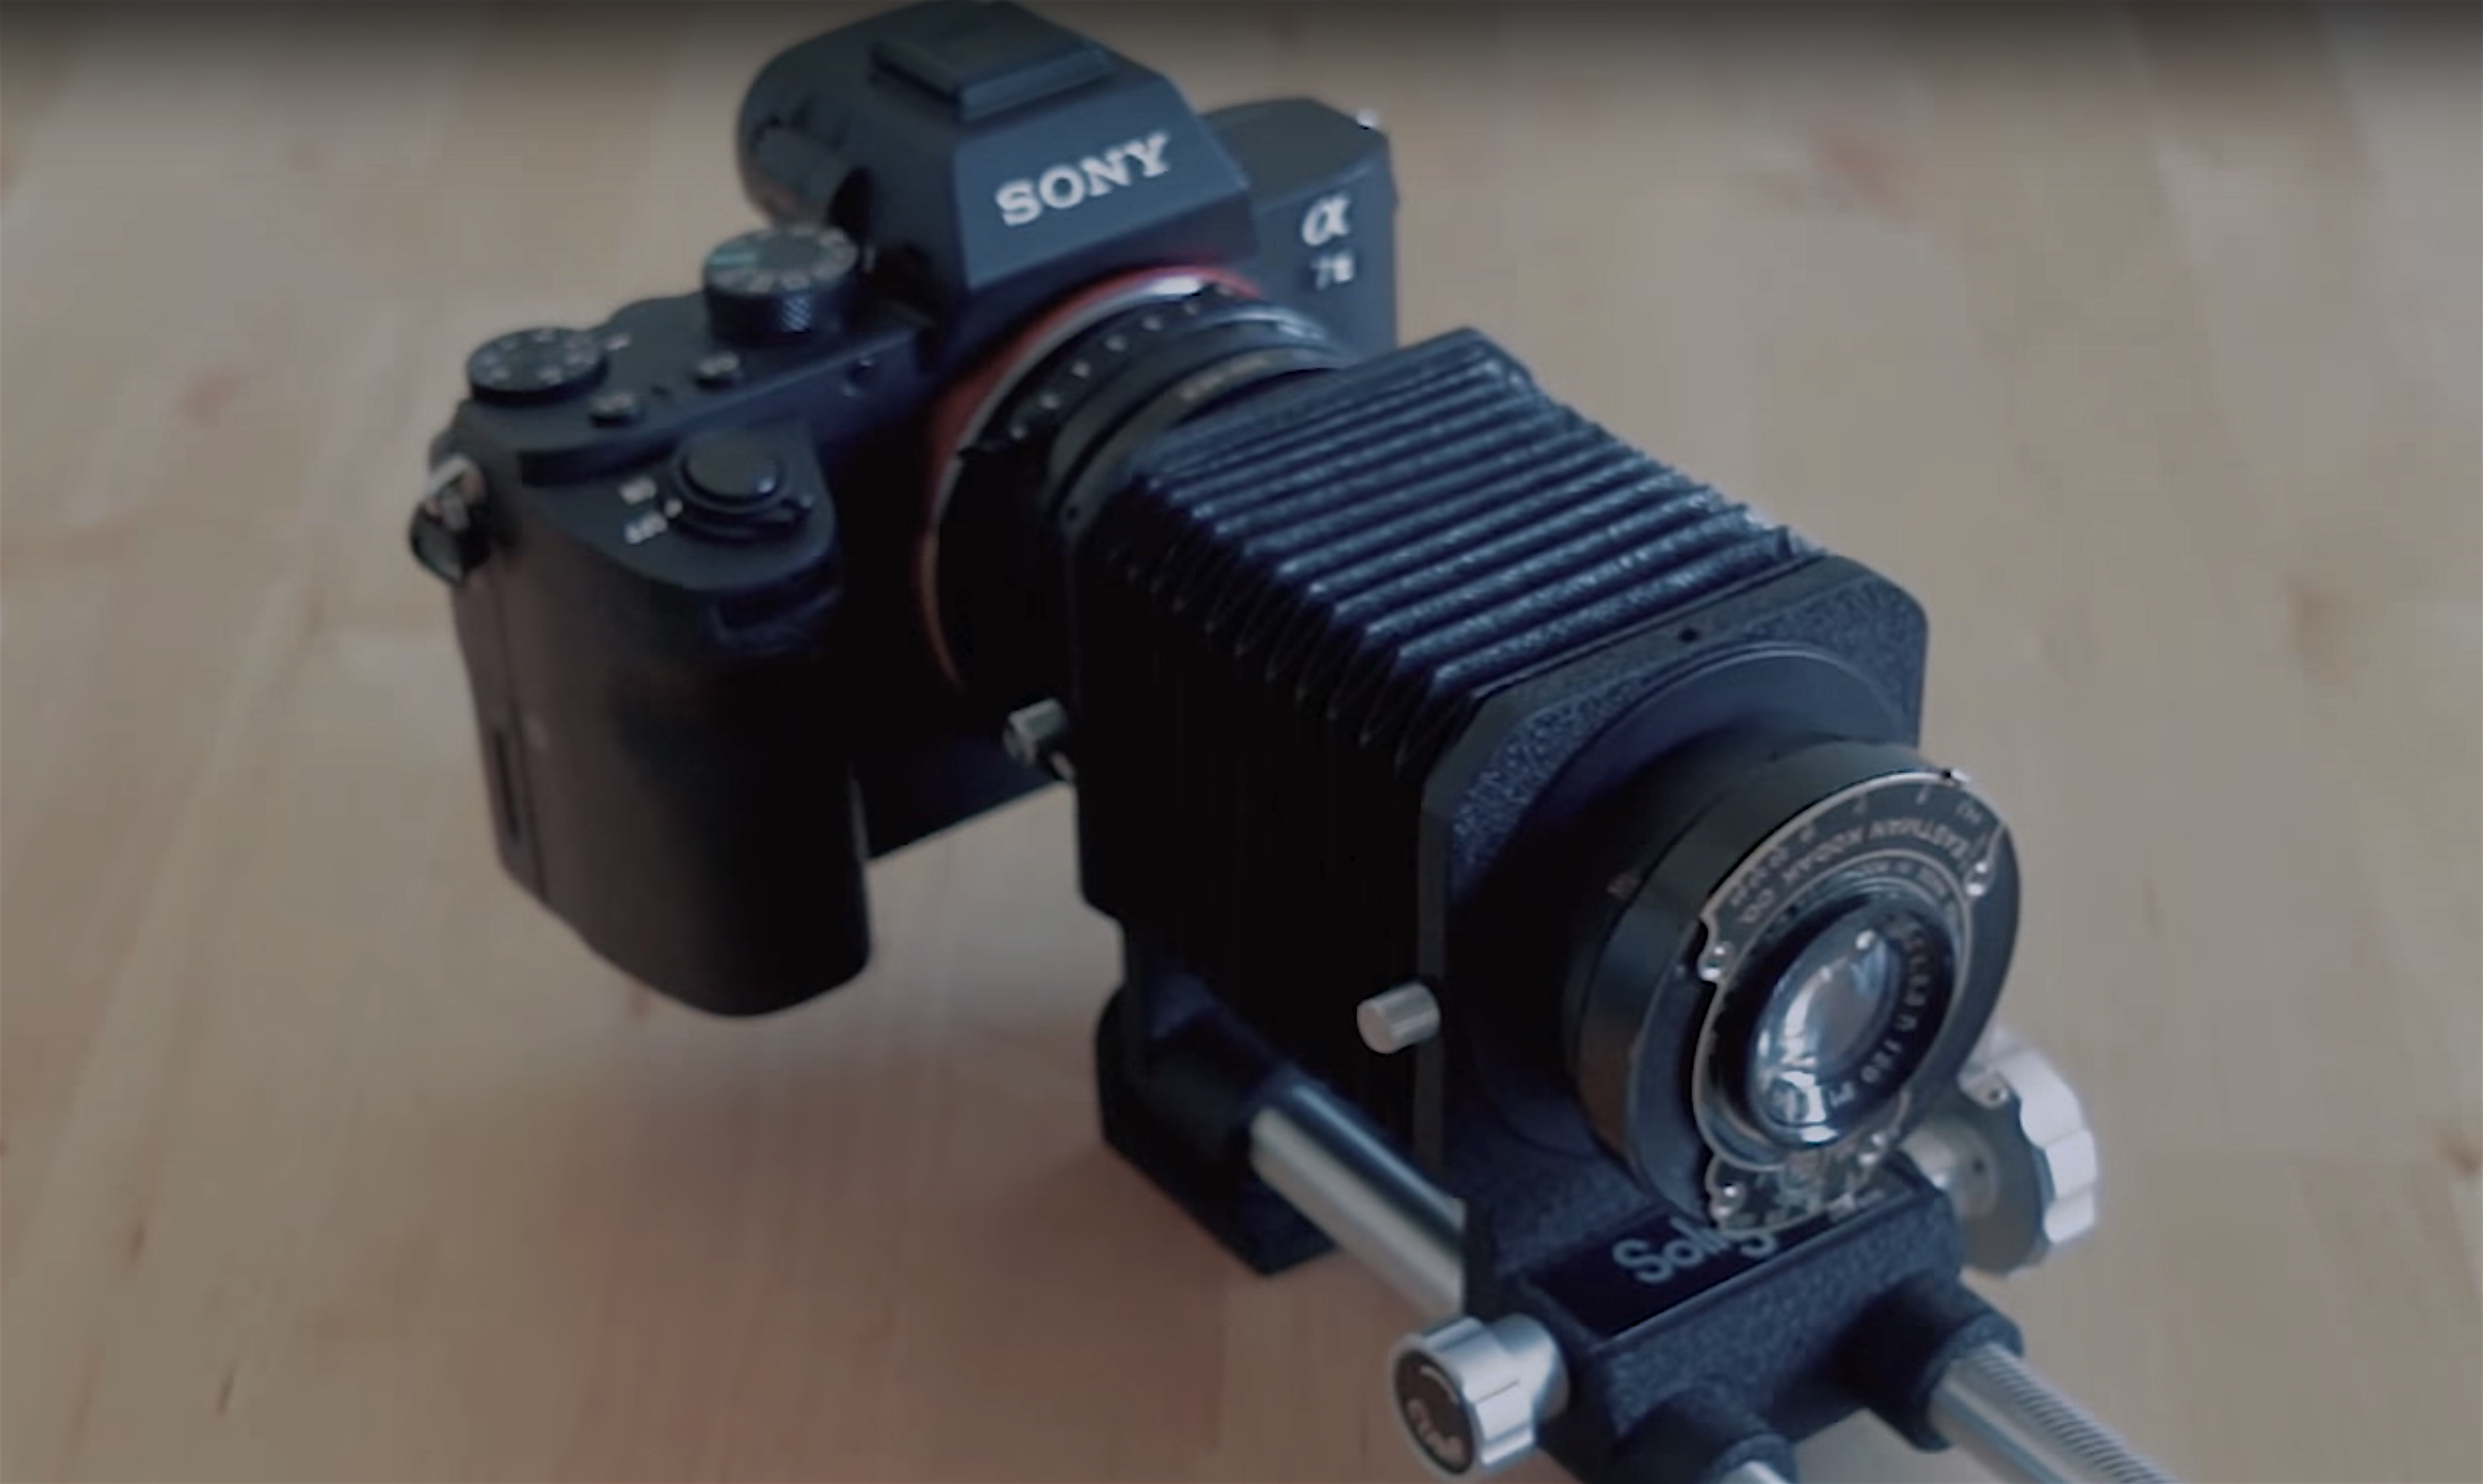 How to Shoot Video with a 105 Year Old Lens